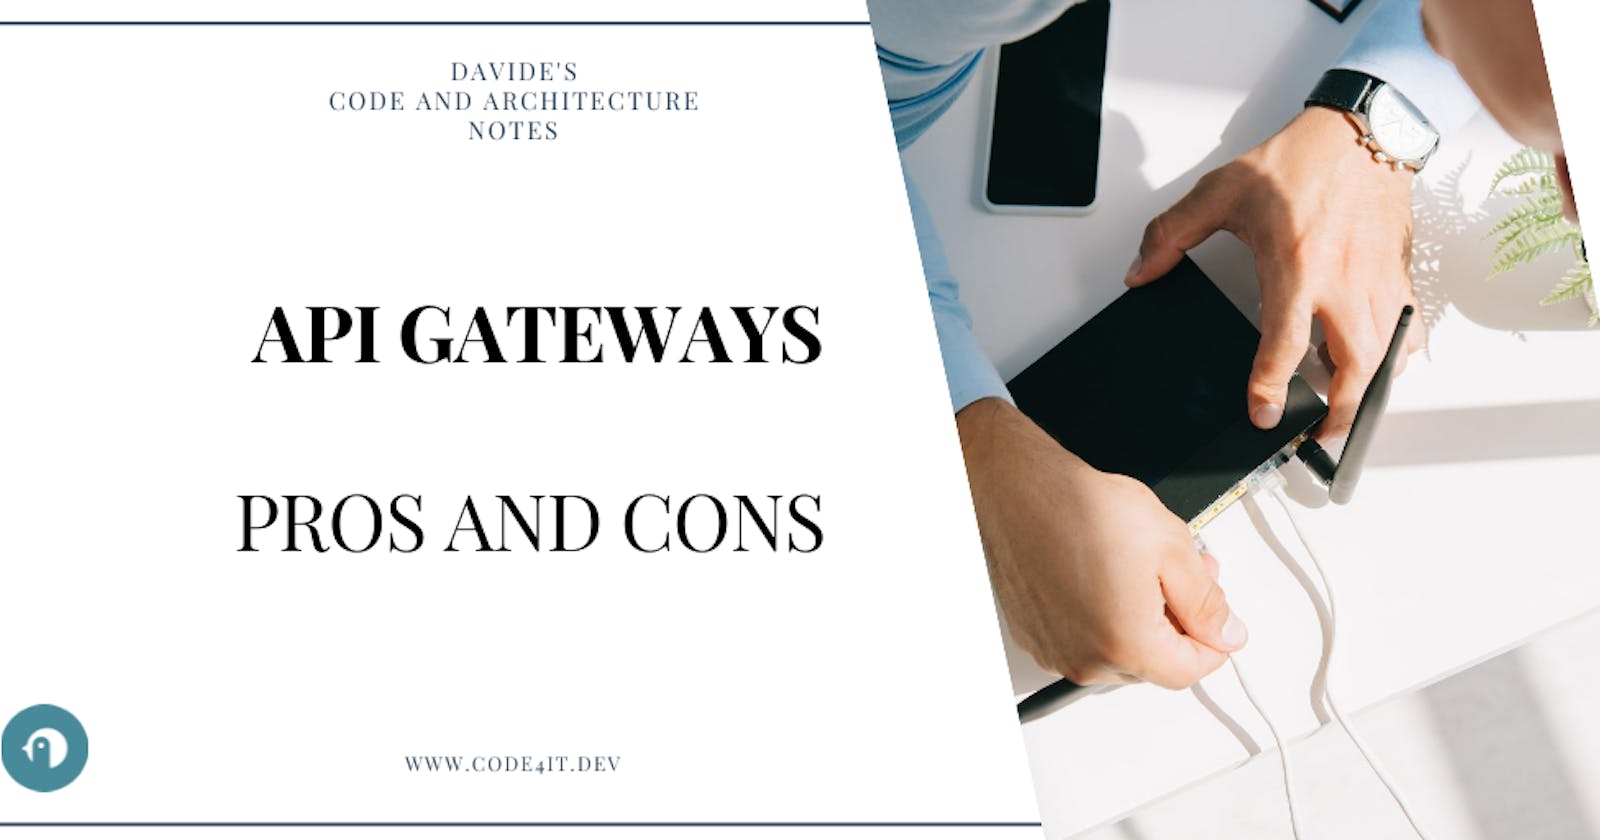 Davide's Code and Architecture Notes - Pros and Cons of API Gateways (with vendors comparison)